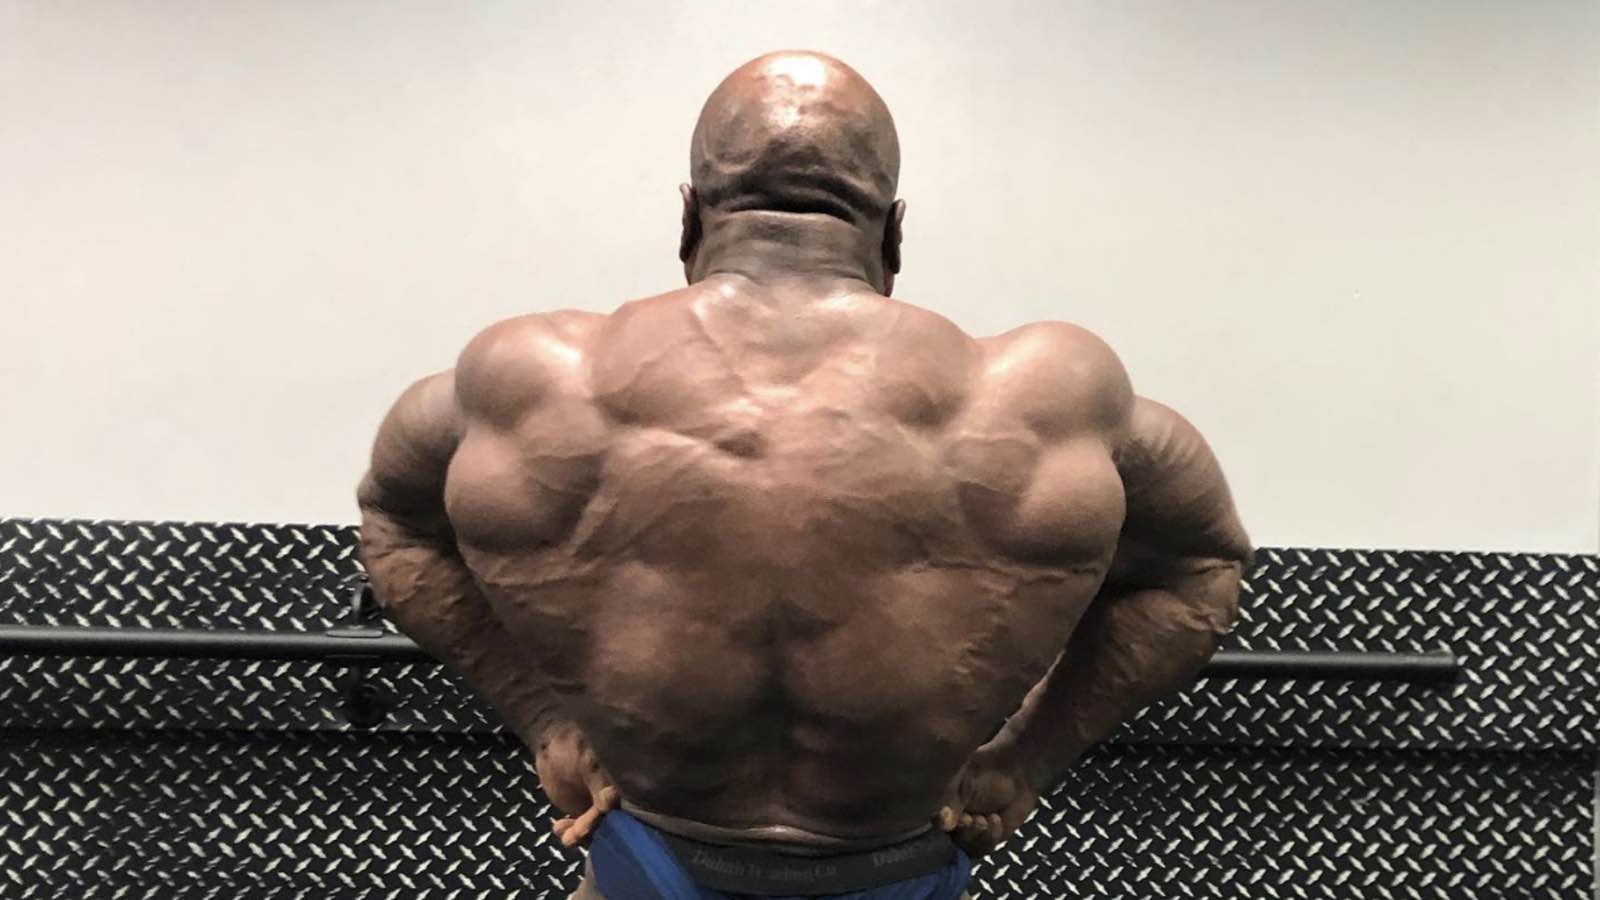 shaun-clarida-shows-off-86-kilogram-(190-pound)-body-weight-ahead-of-2023-arnold-classic-–-breaking-muscle